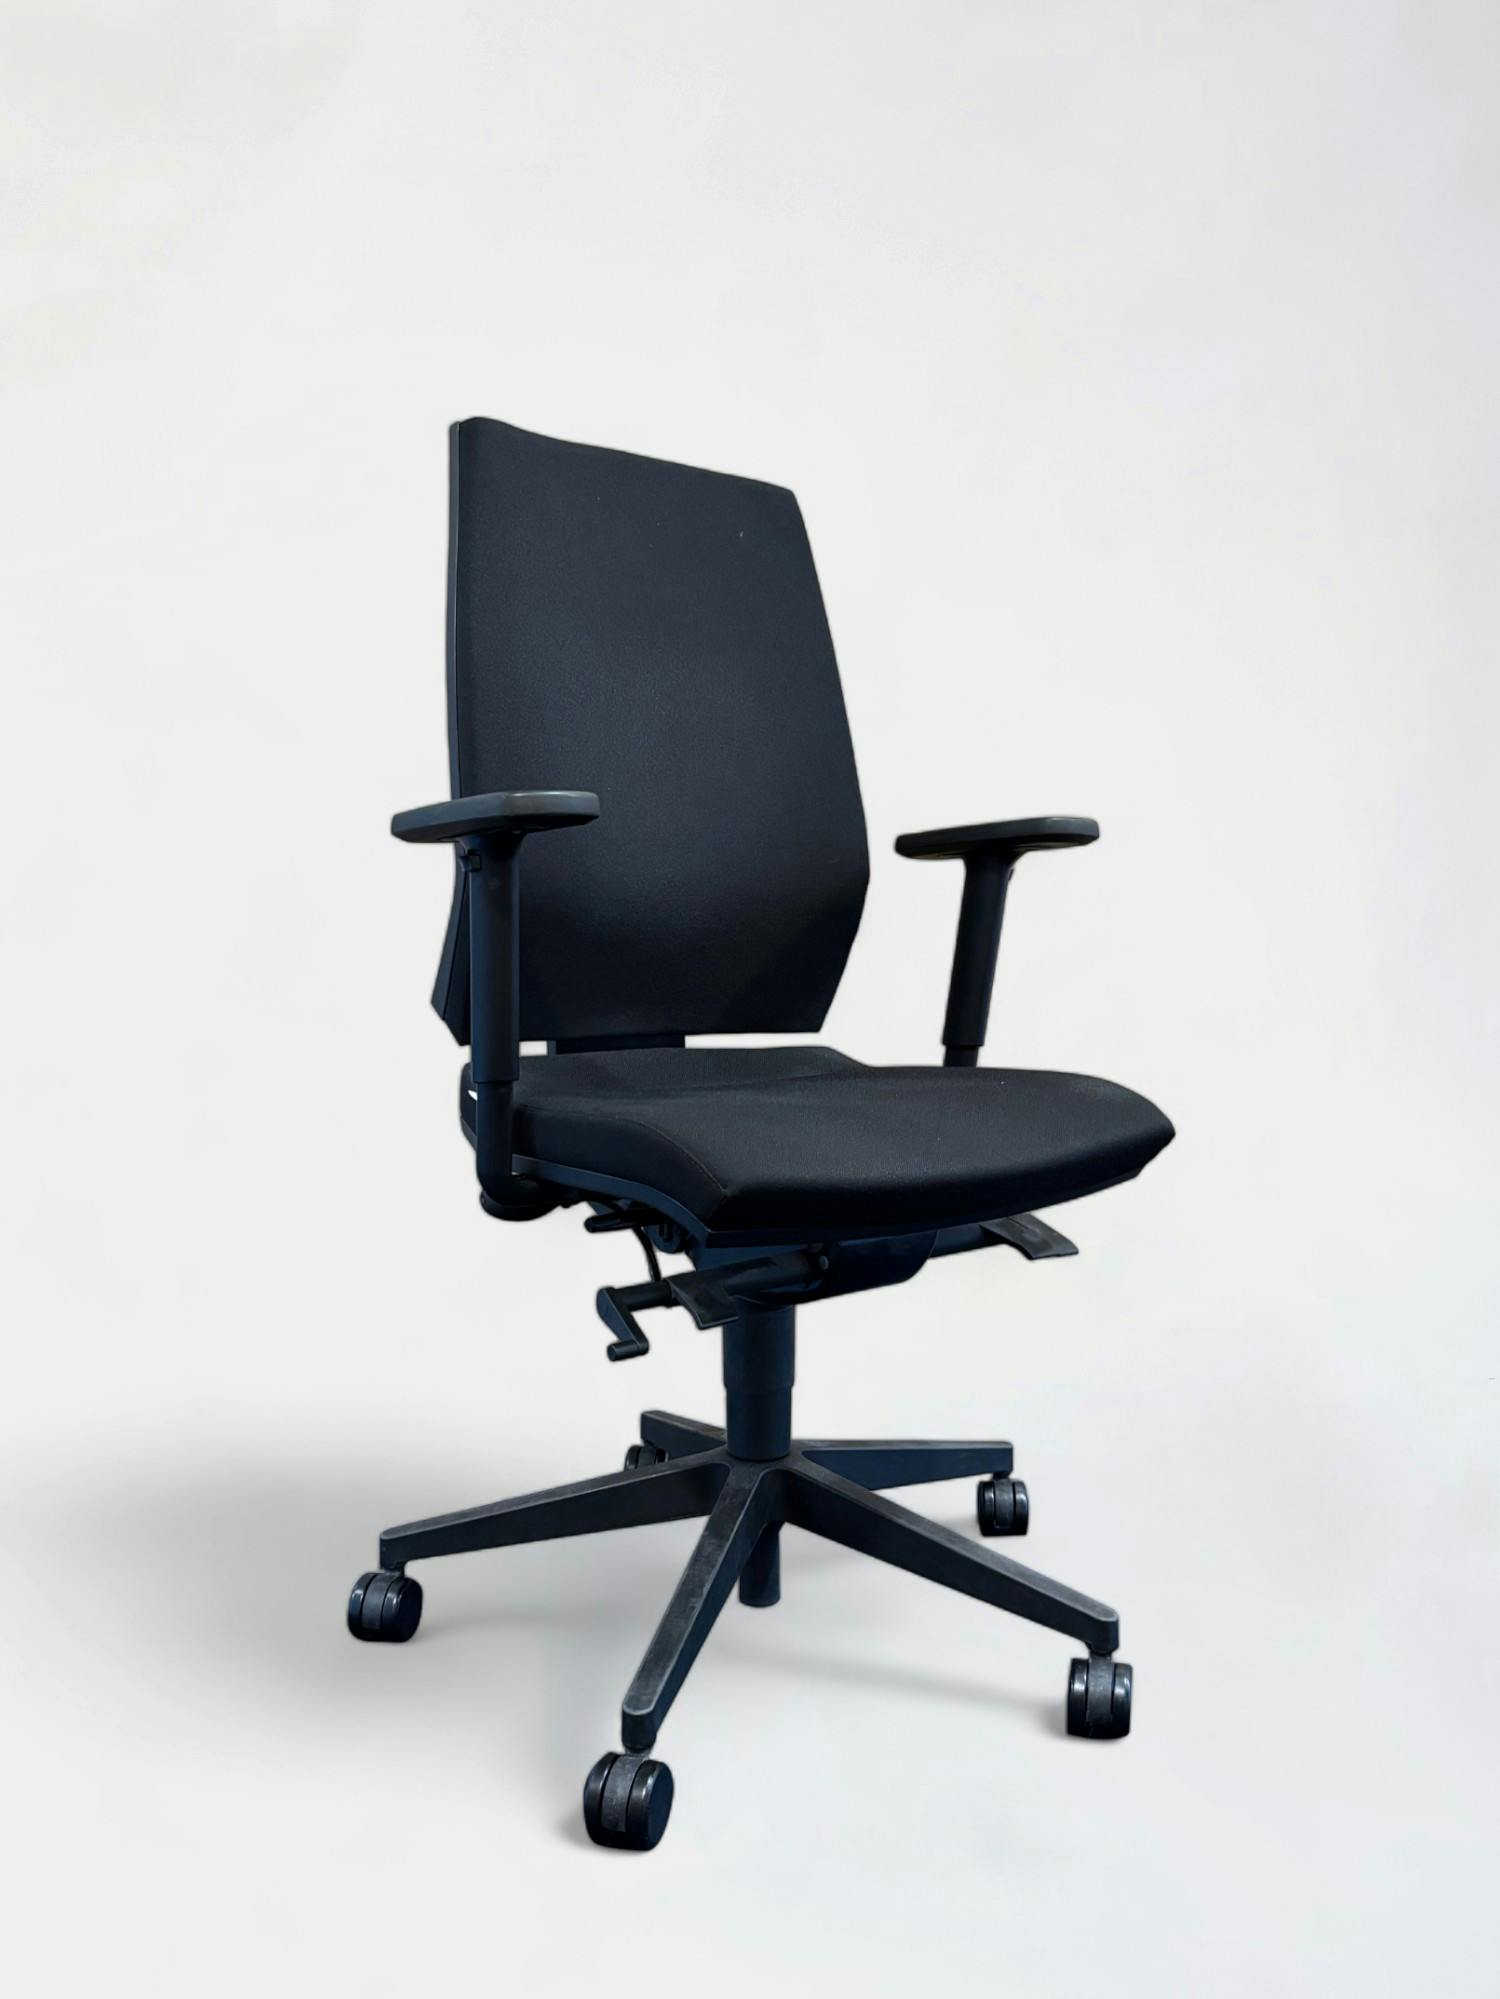 Black Fabric Office Chair with Adjustable Armrests - Relieve Furniture